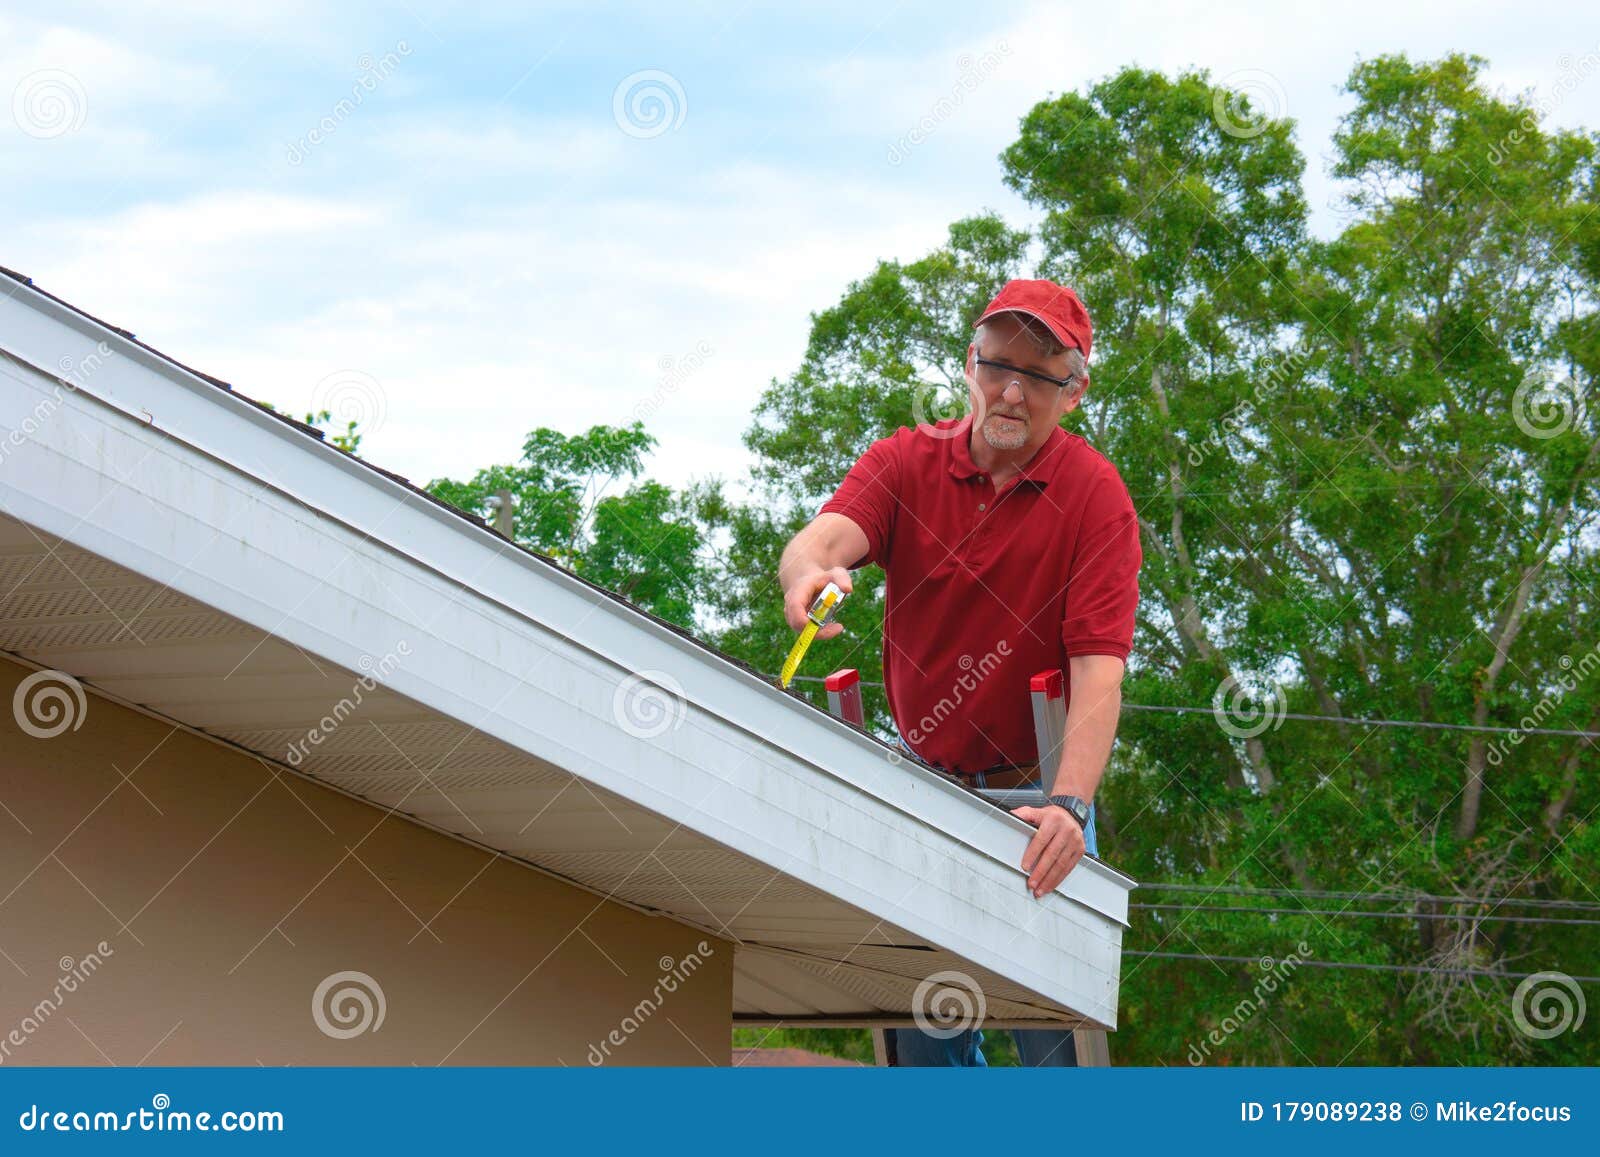 wind mitigation inspection inspector on a ladder doing inspection on new roof to generate a risk rating